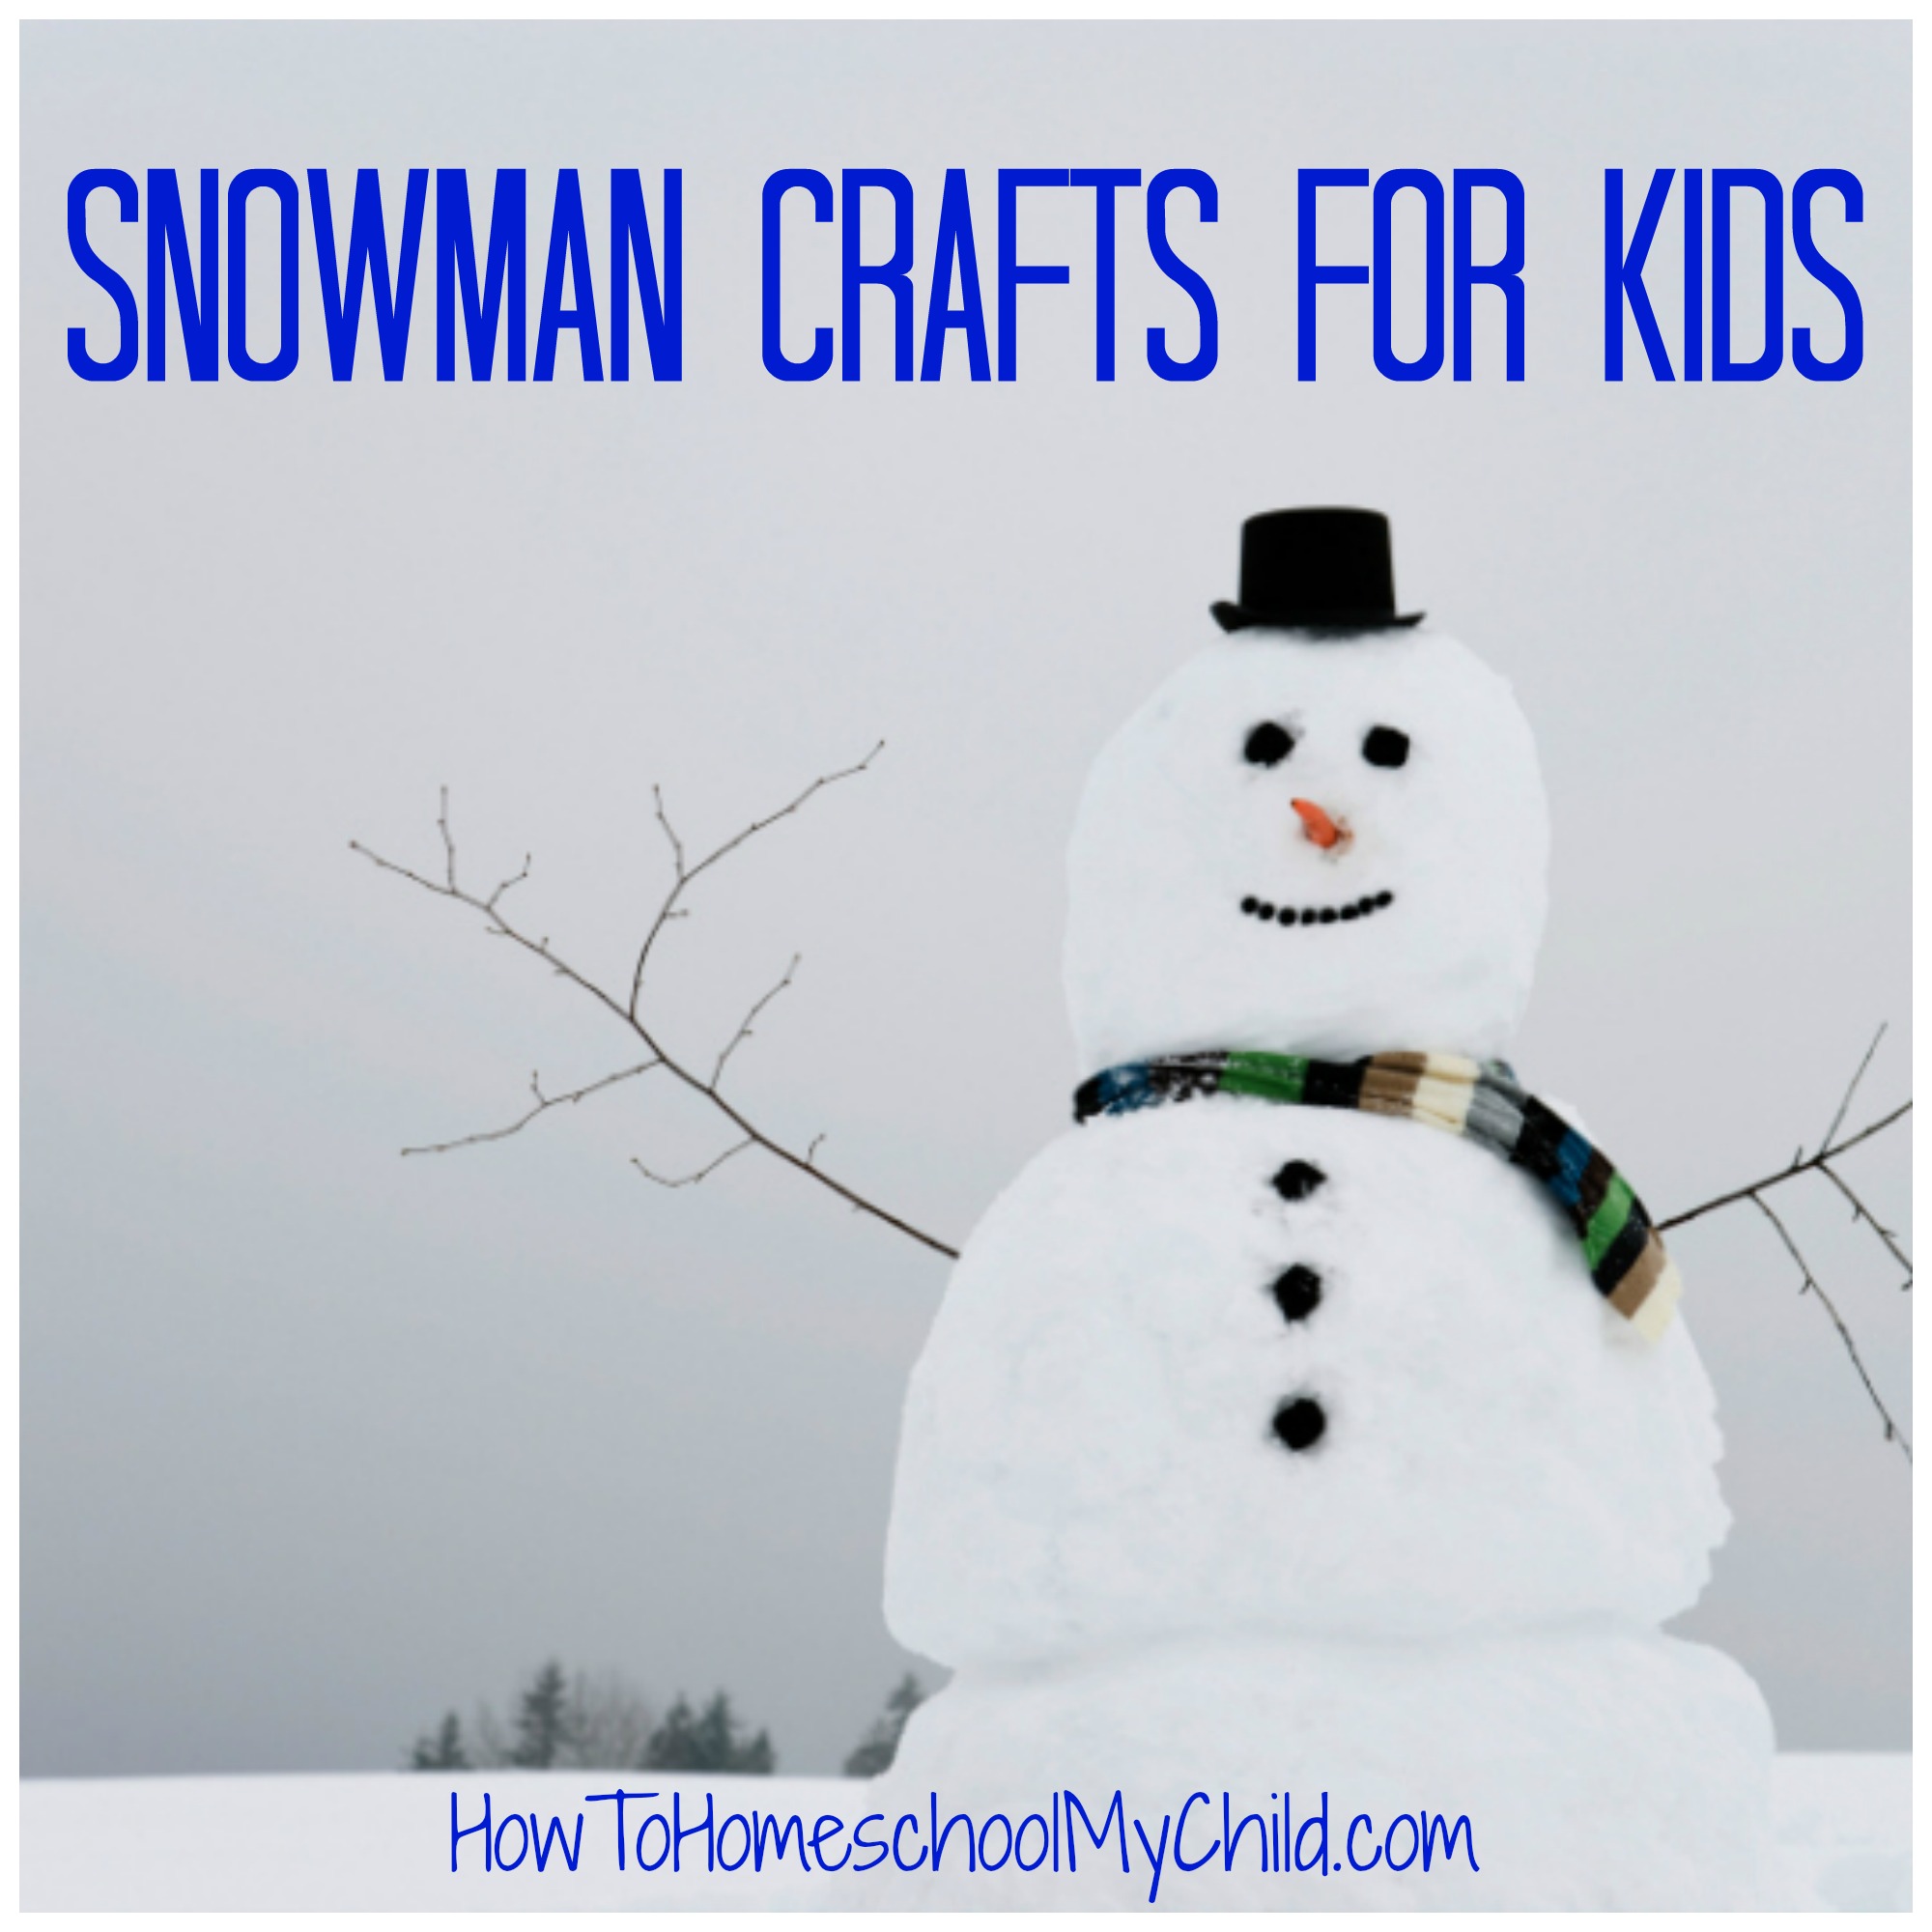 snowman crafts for kids ~ from HowToHomeschoolMyChild.com